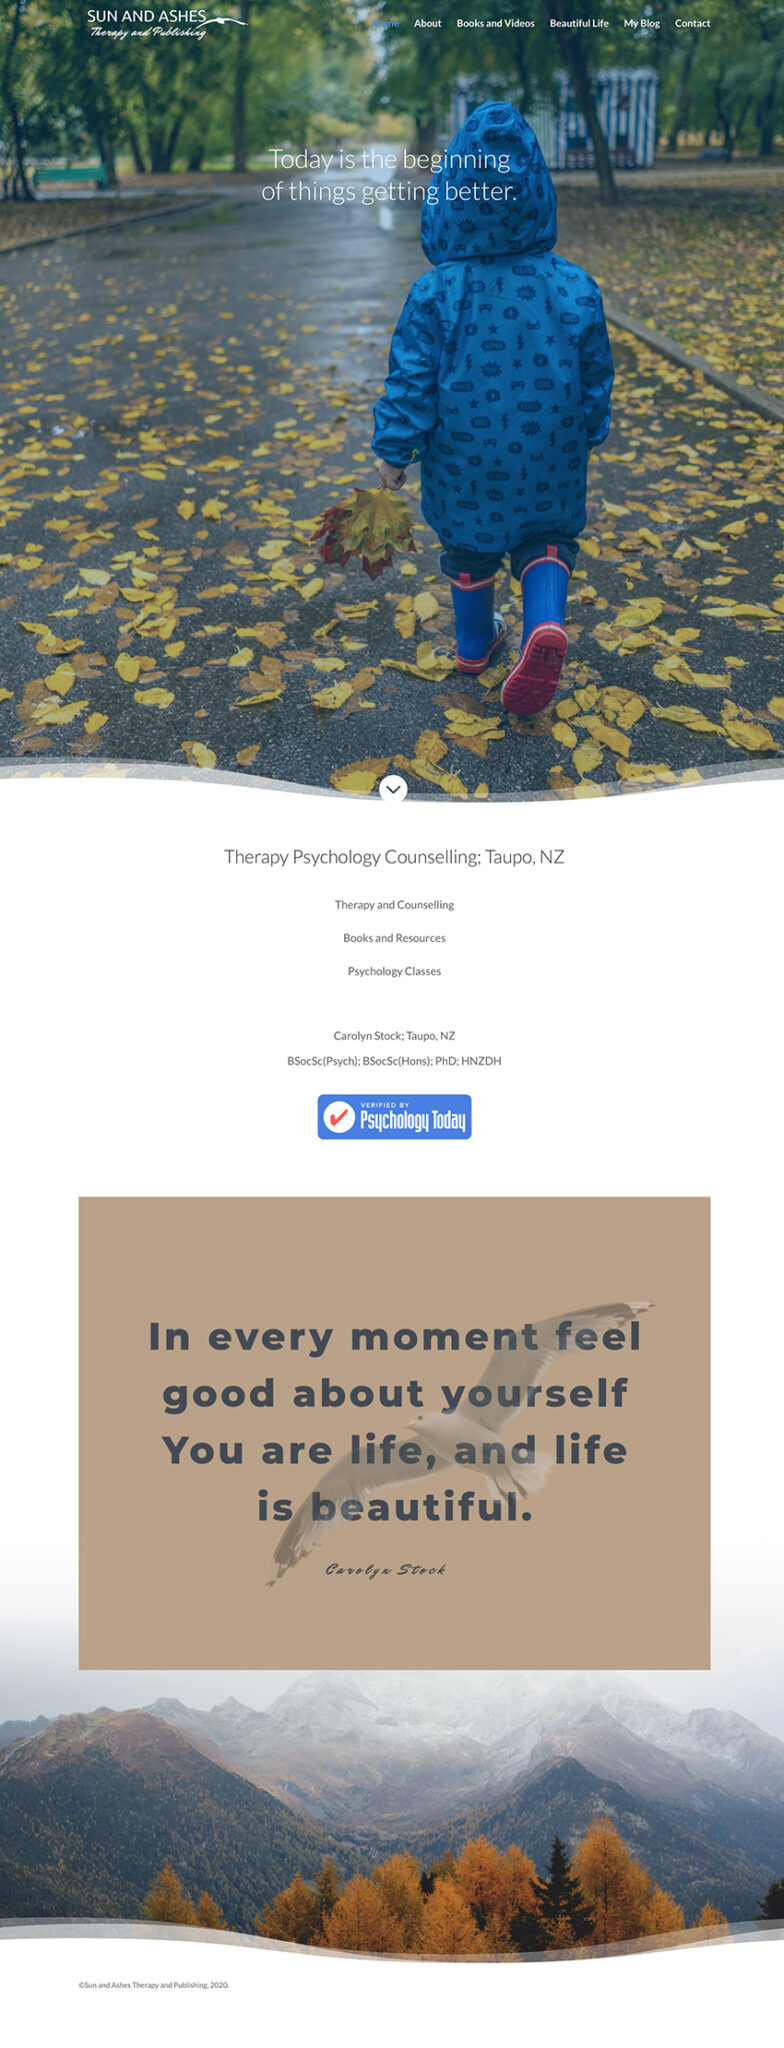 Therapy for Change Website Design